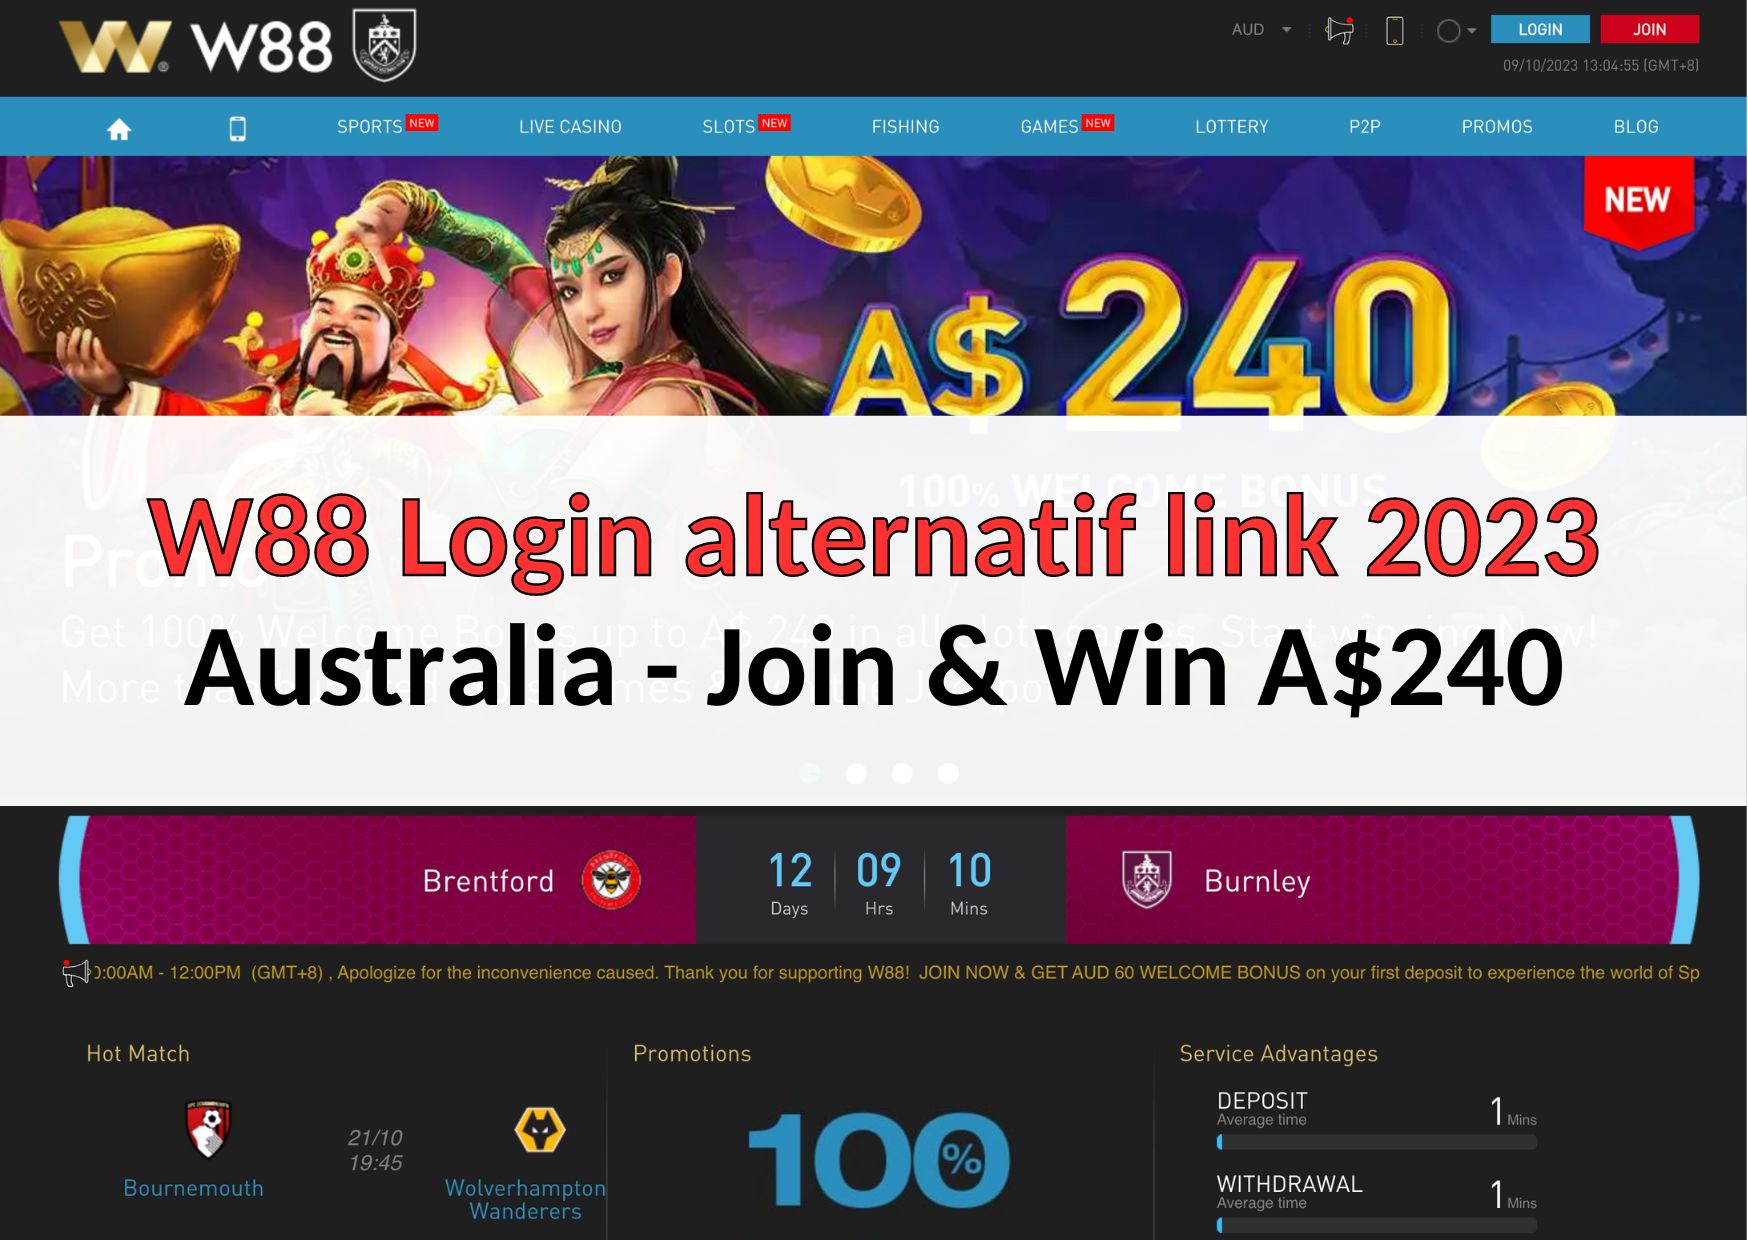 W88 - No. 1 Online Sportsbook & Casino - Sign Up & Win A$240